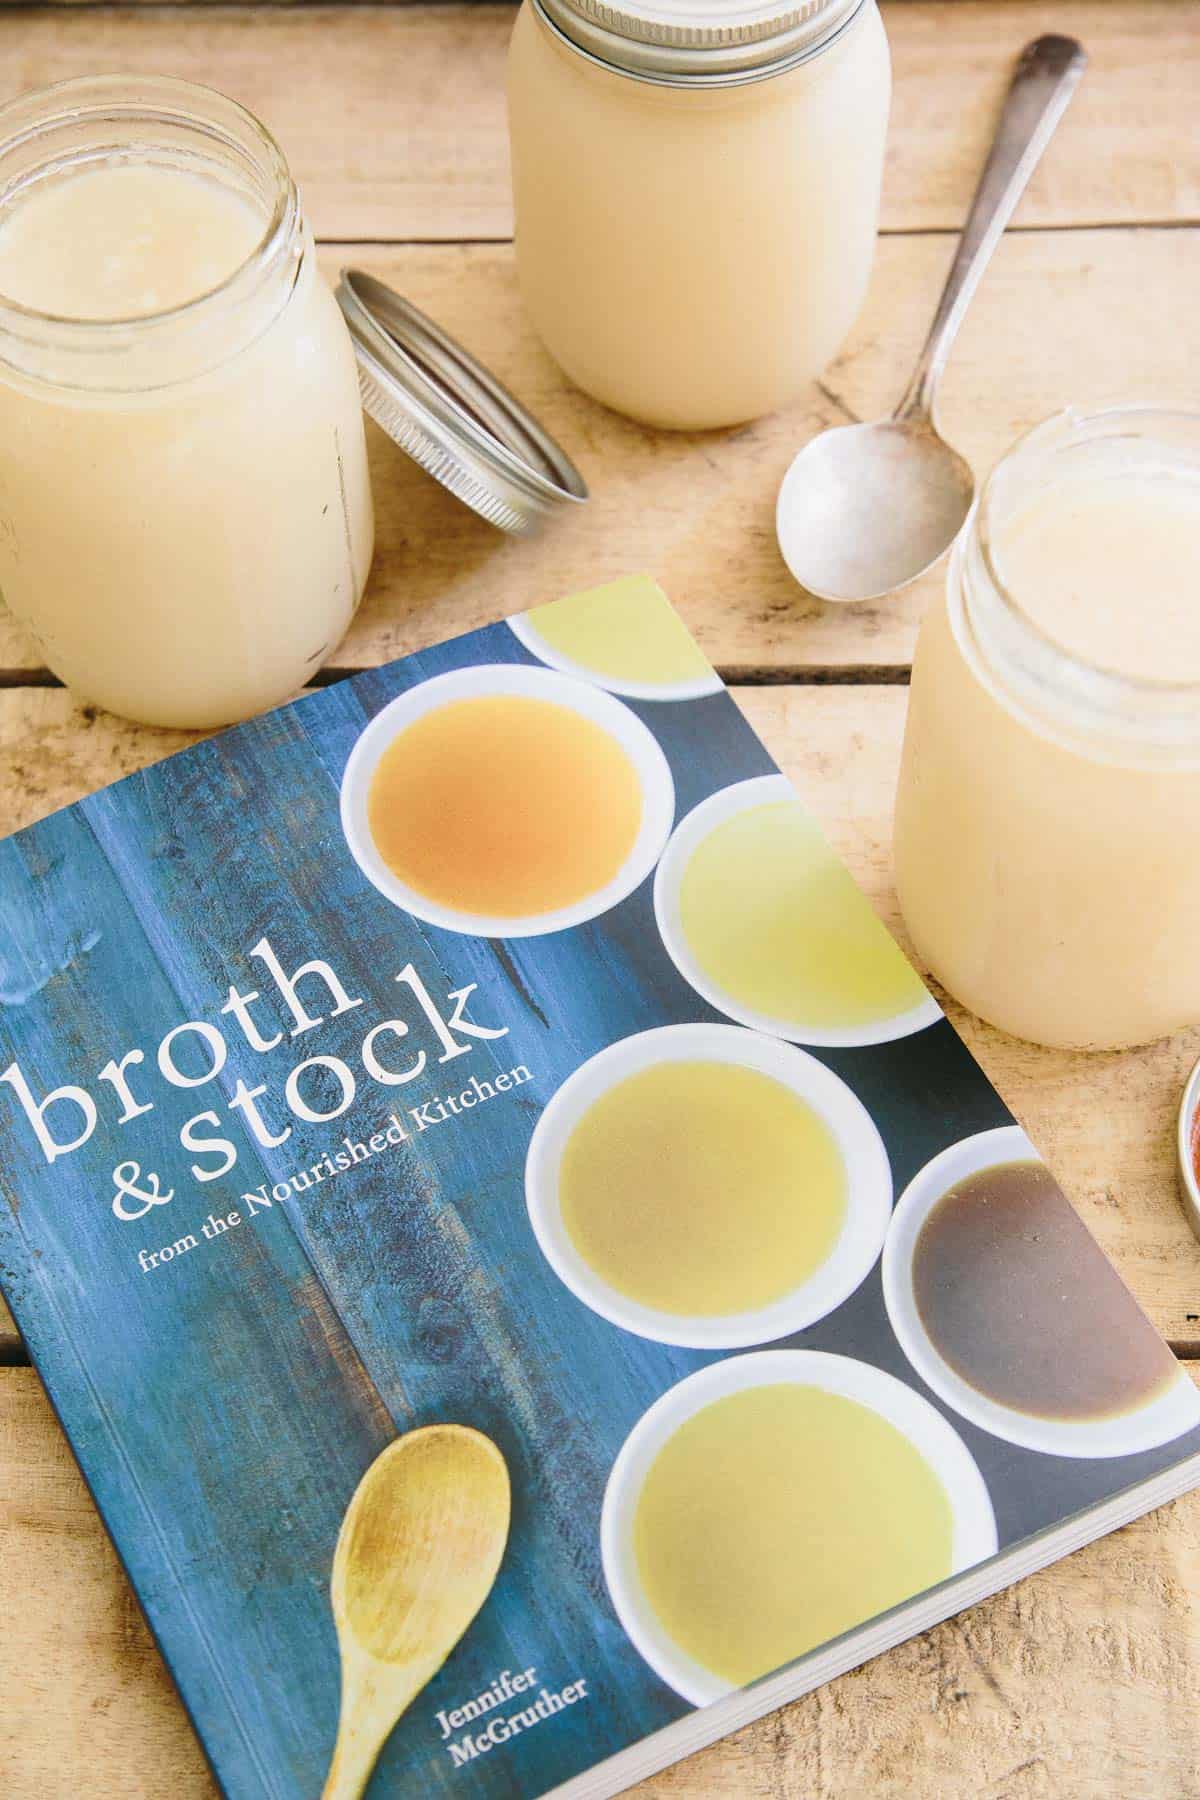 Homemade Chicken Bone Broth from broth & stock by Jennifer McGruther is used in this Sopa de Lima recipe.